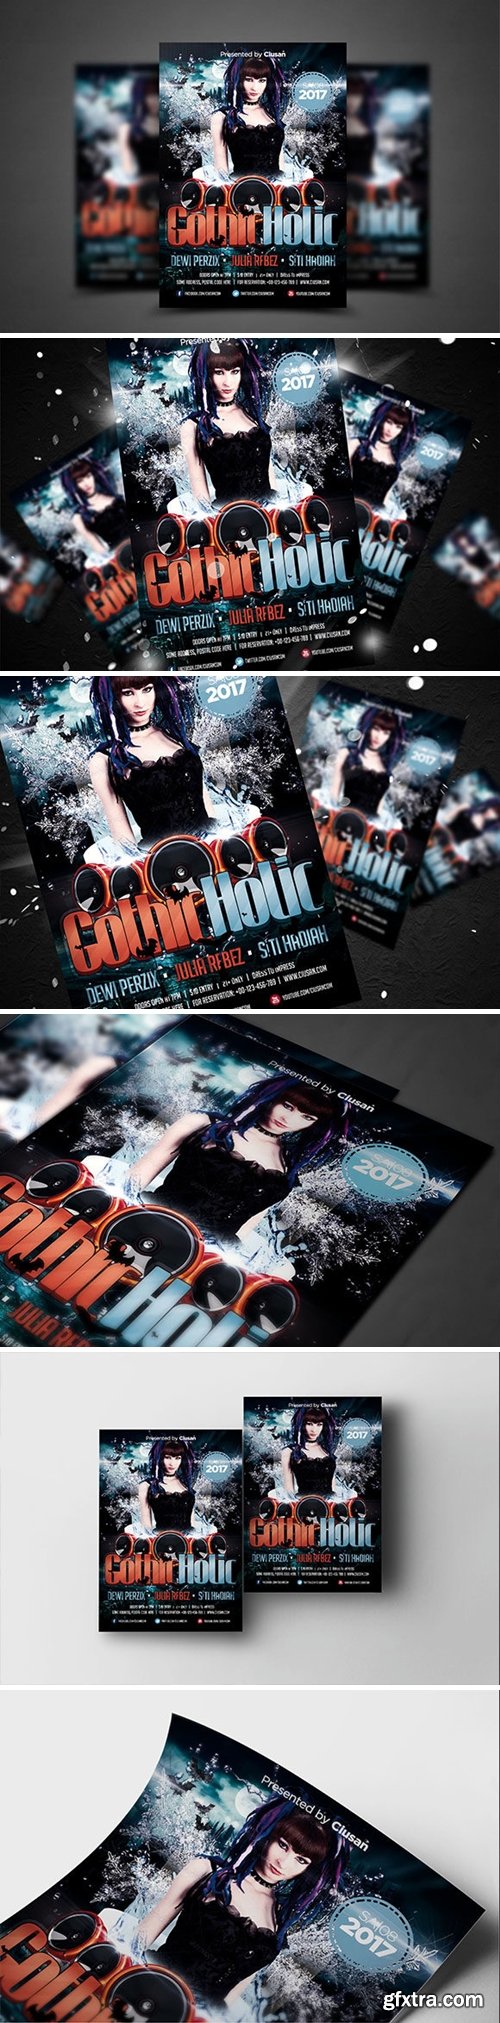 Gothic Holic Flyer Template 3940042